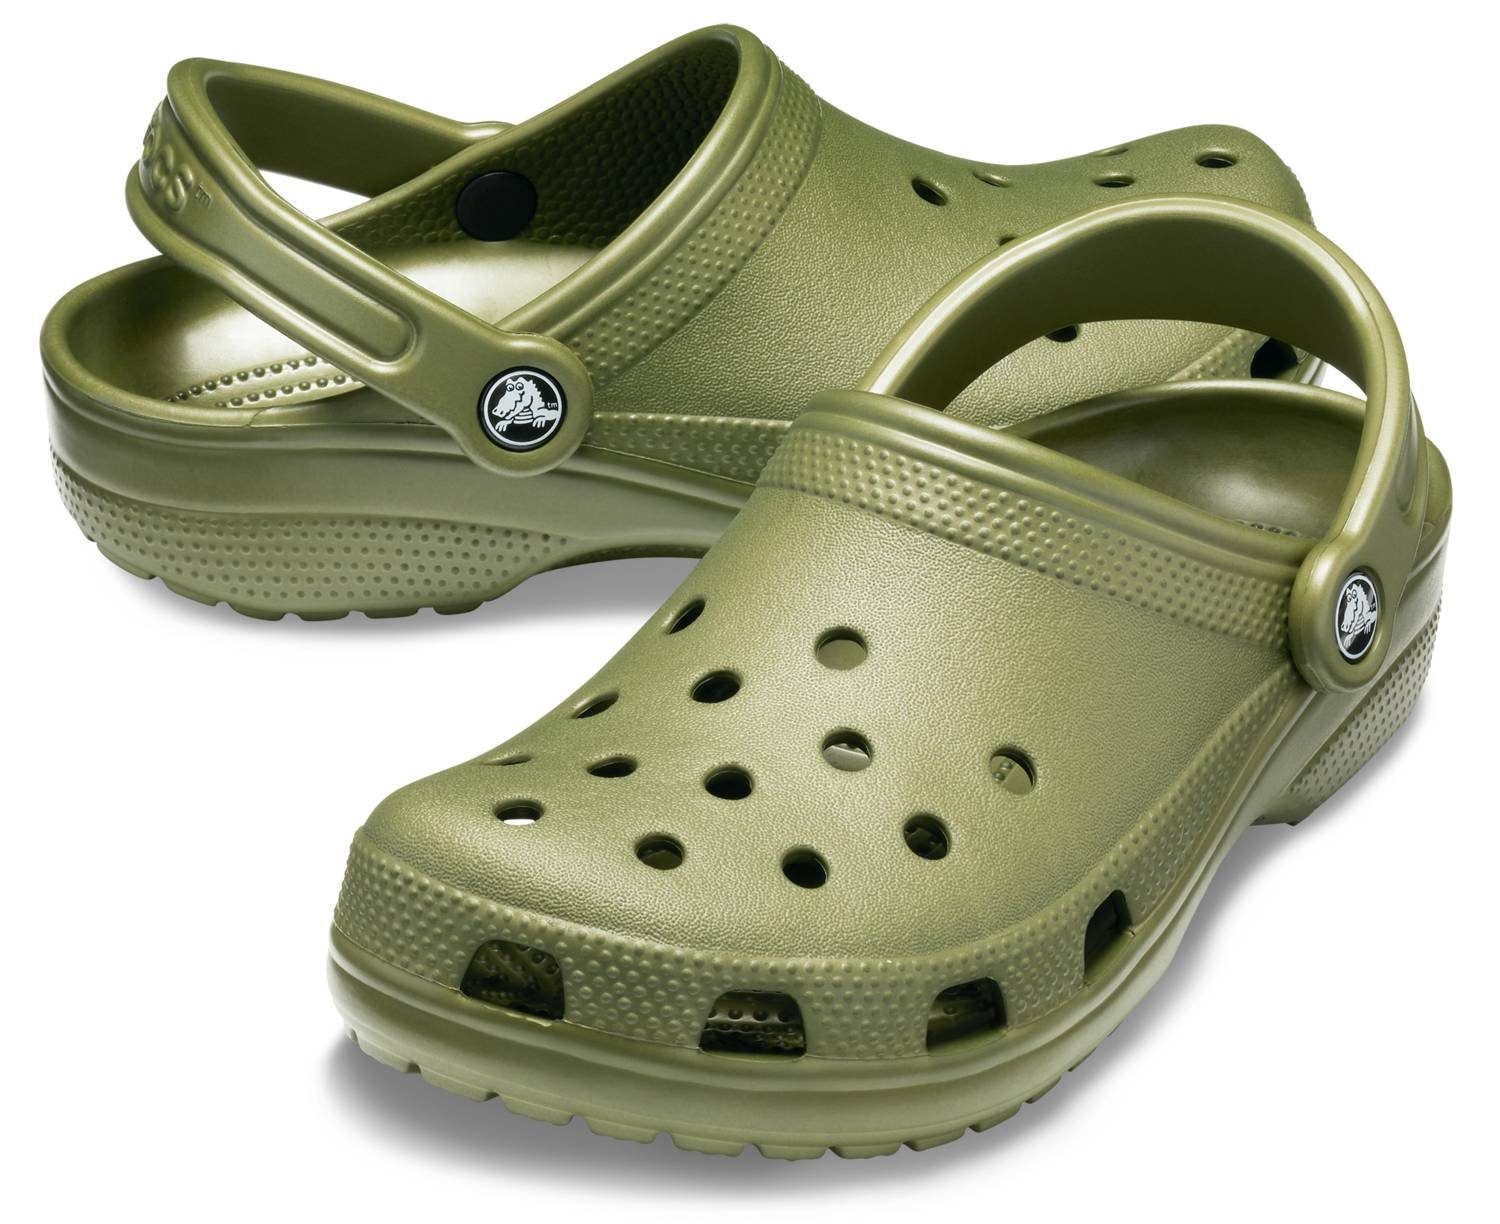 Outlet-Produkte Crocs Crocs Clog Green Army Classic